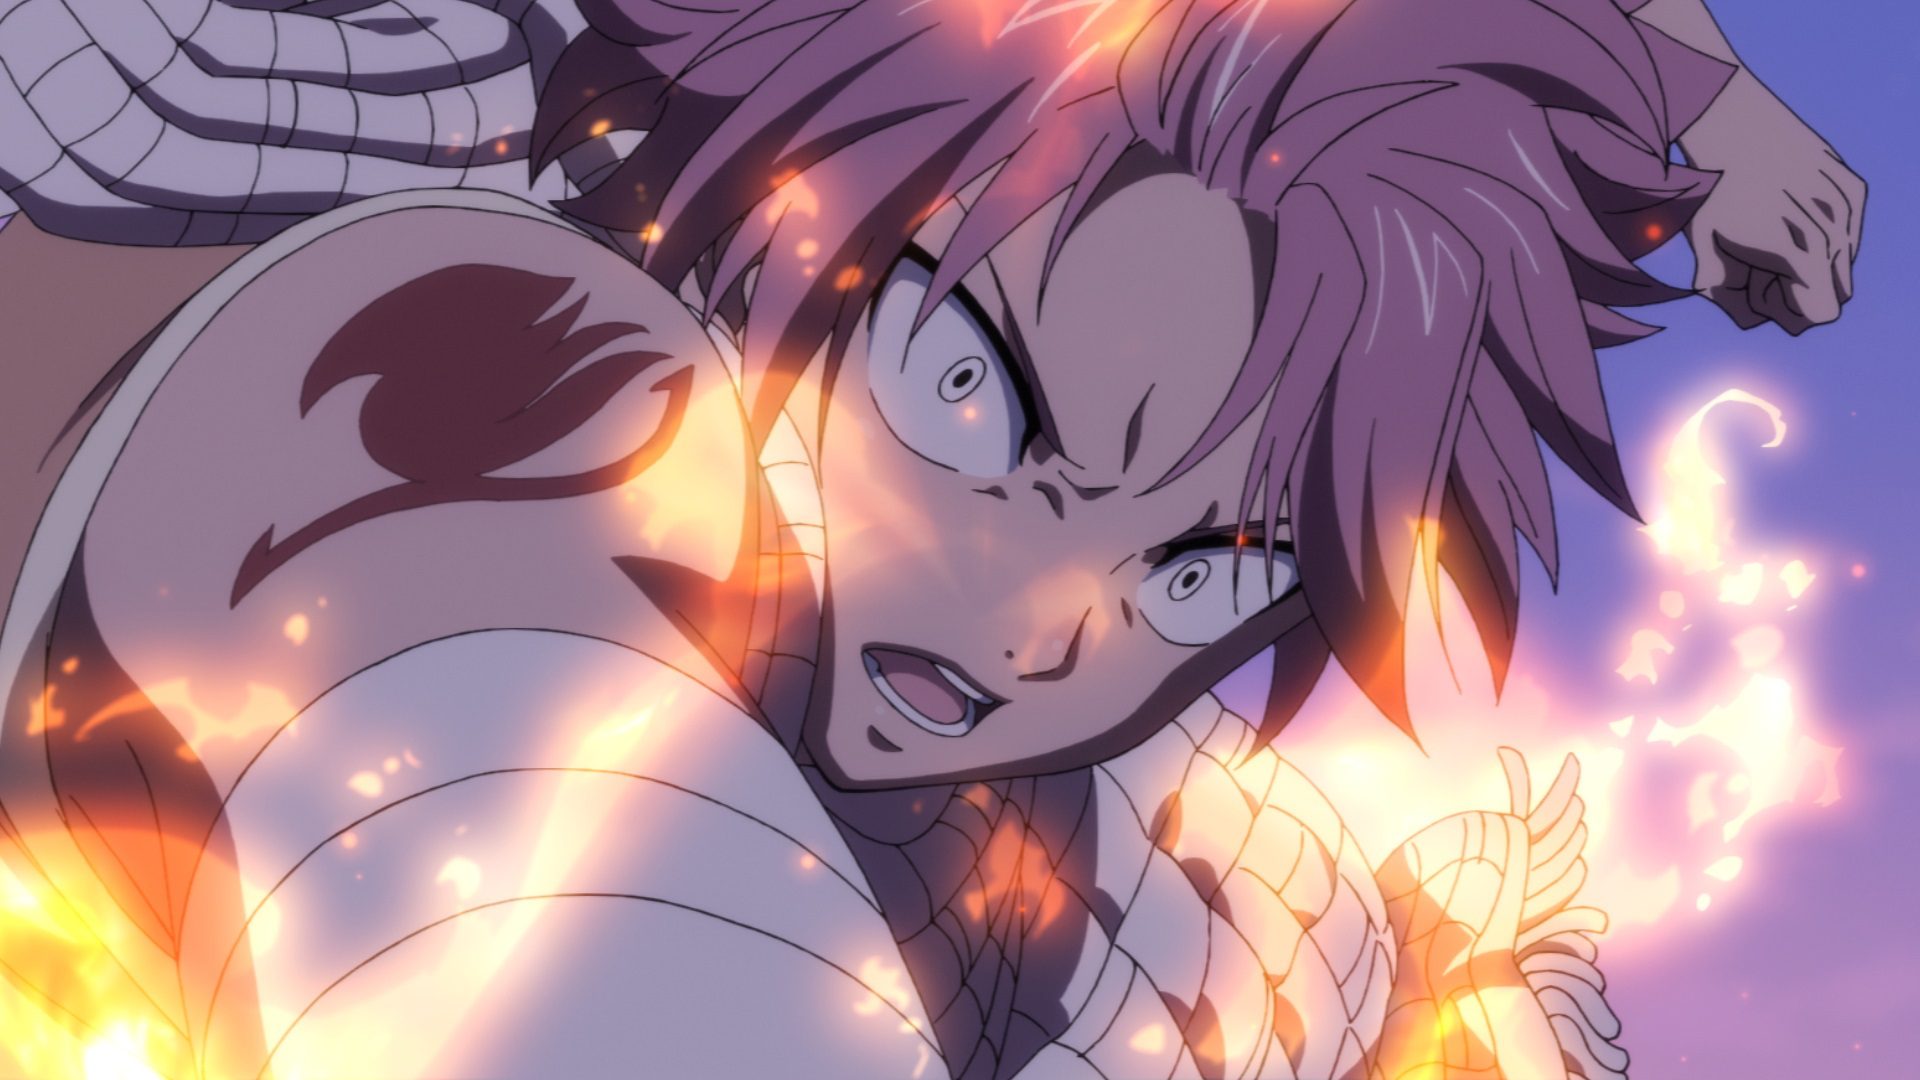 [Movie Review] 'Fairy Tail: Dragon Cry' thoroughly embraces anime fans